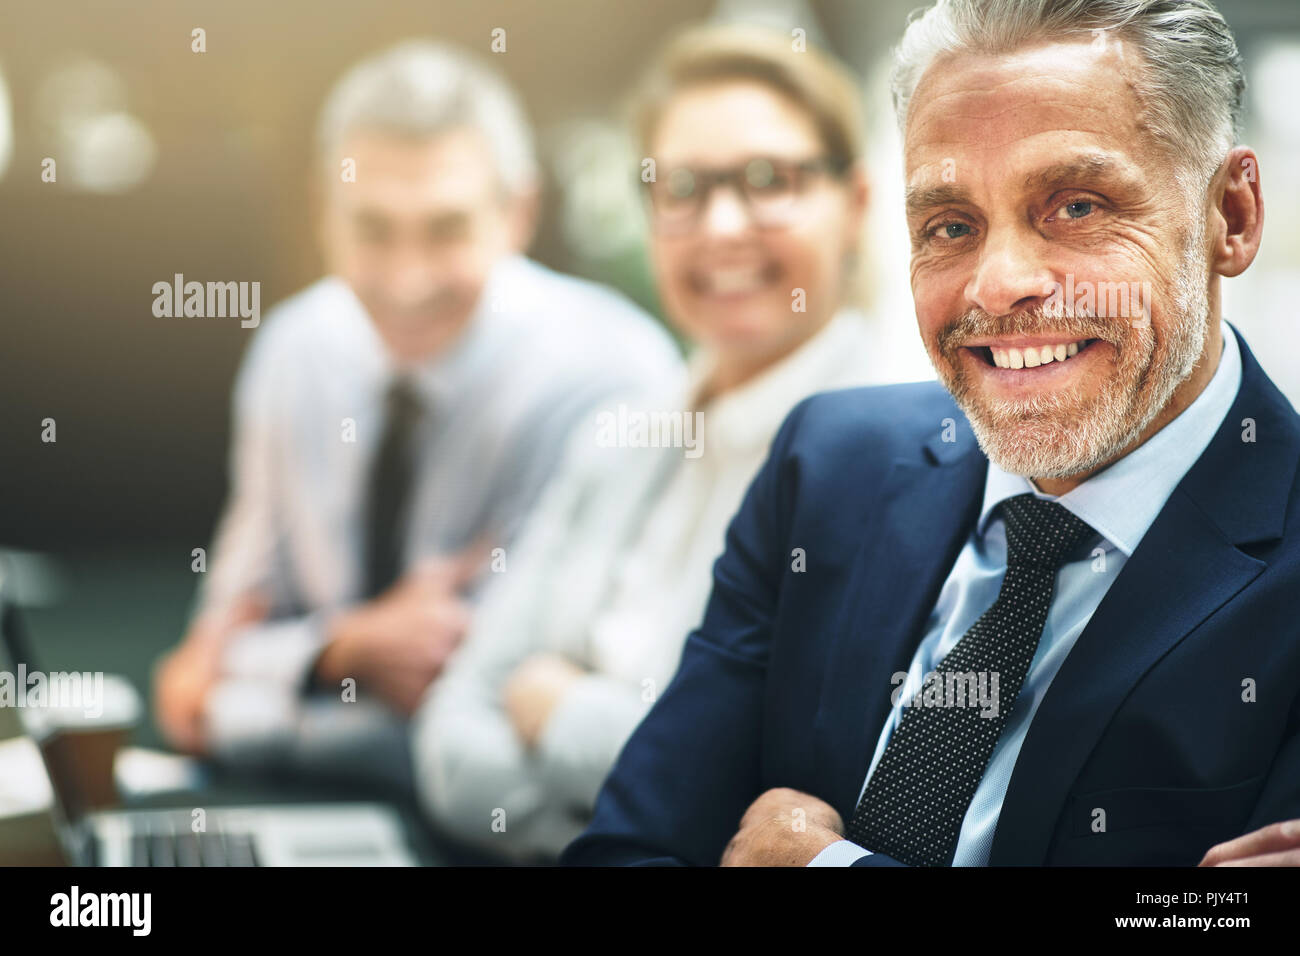 Mature businessman smiling confidently while sitting at a table in an modern office with colleagues in the background Stock Photo